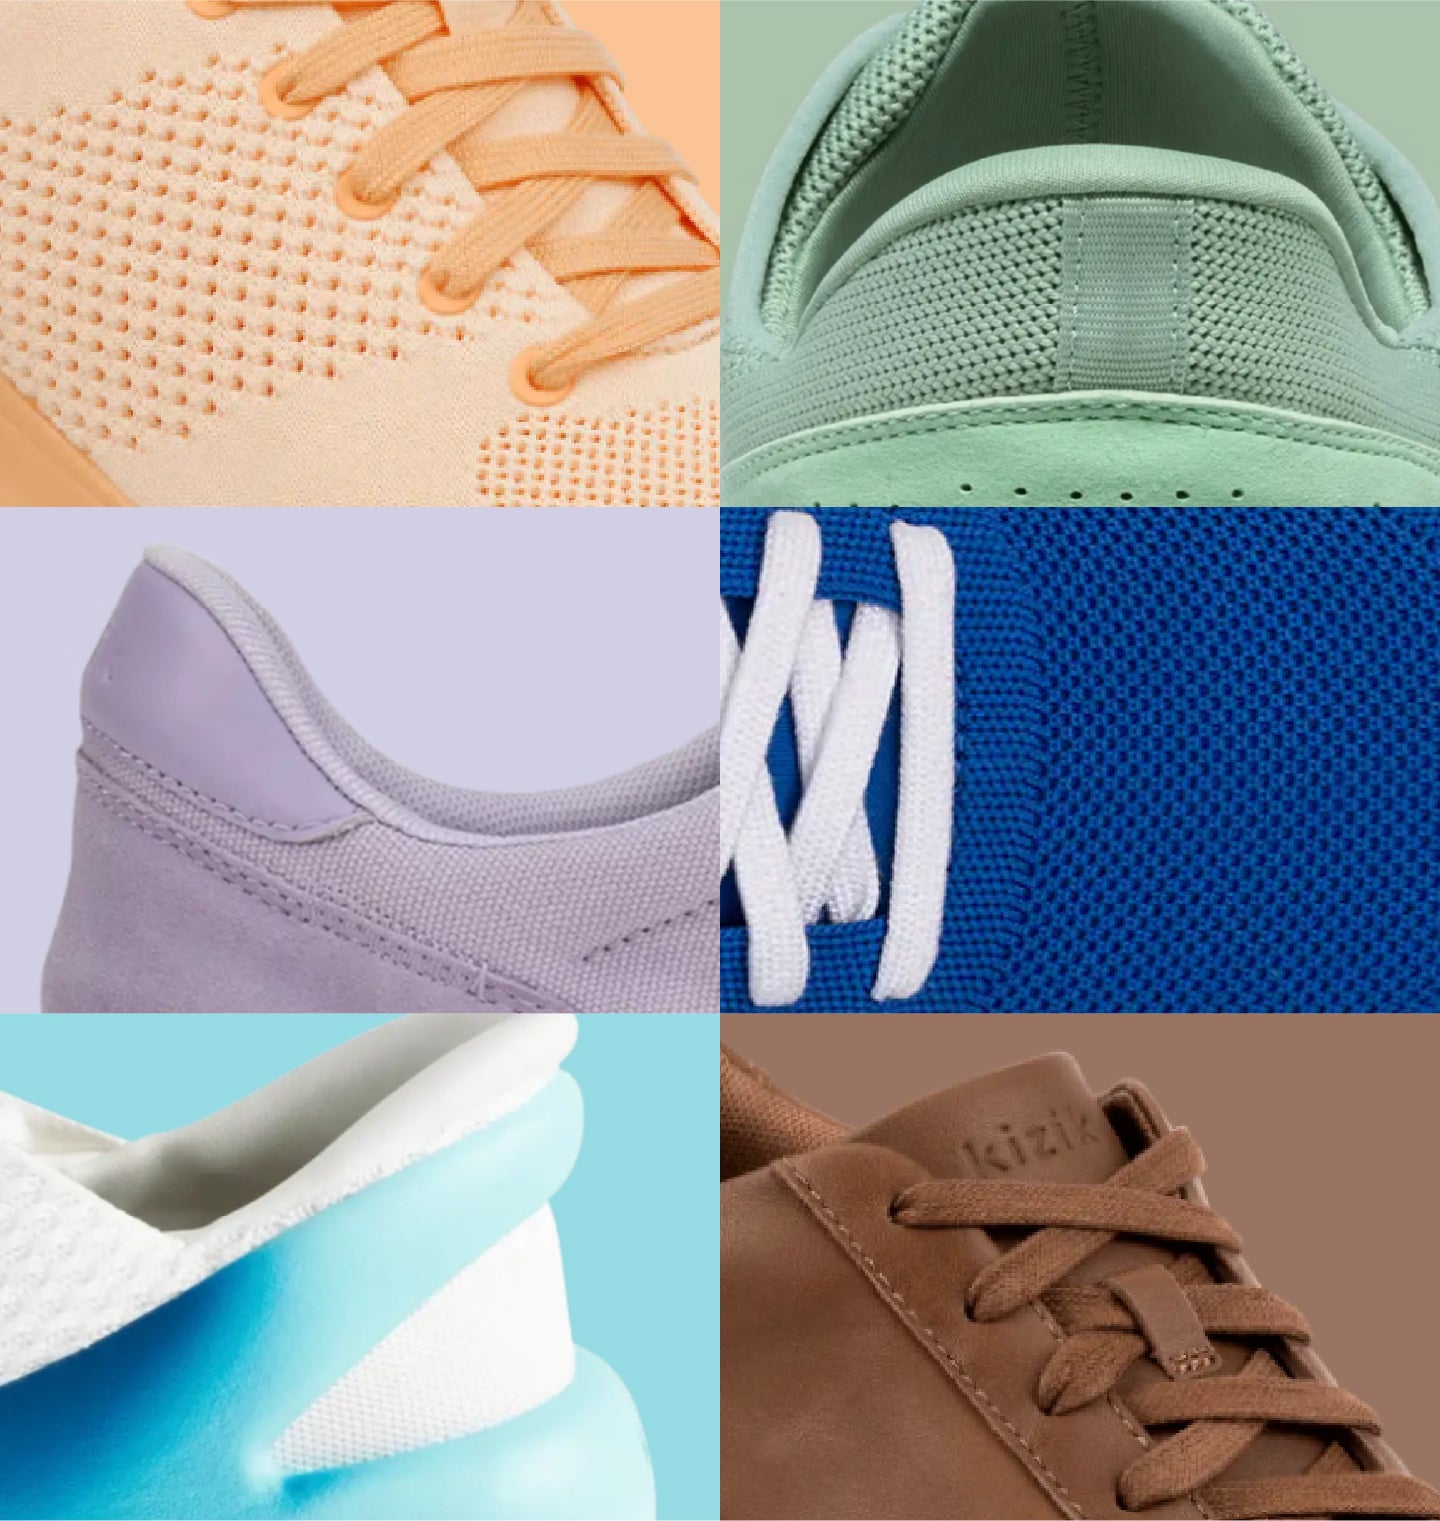 What are the differences between men's and women's sneakers?